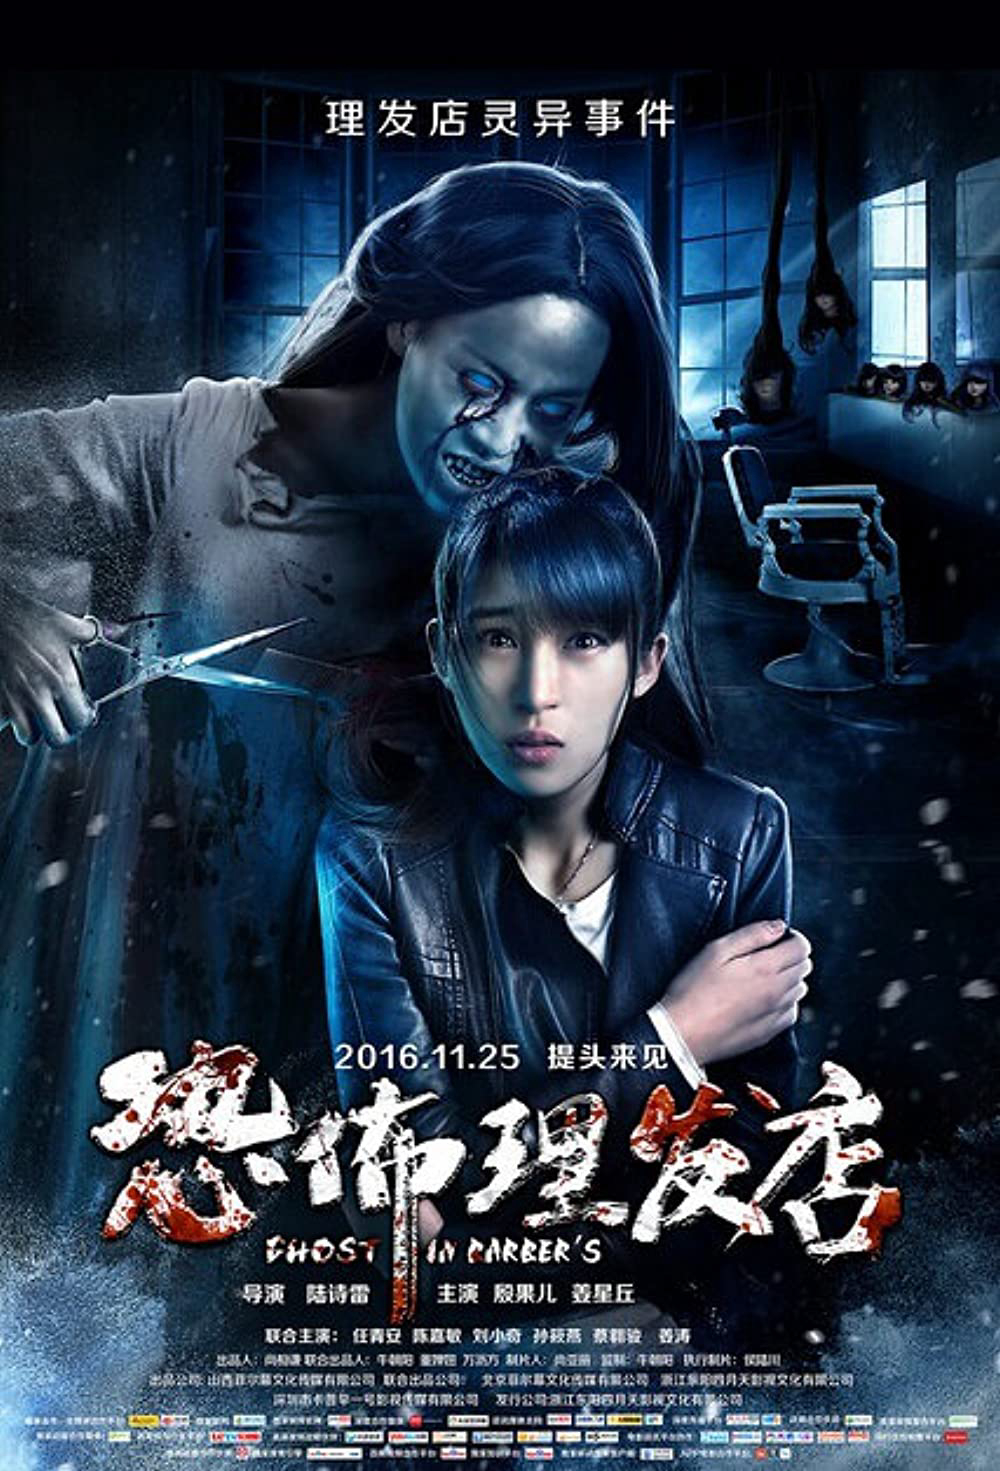 Poster Phim Bóng Ma Kinh Hoàng (Ghost in Barber's)